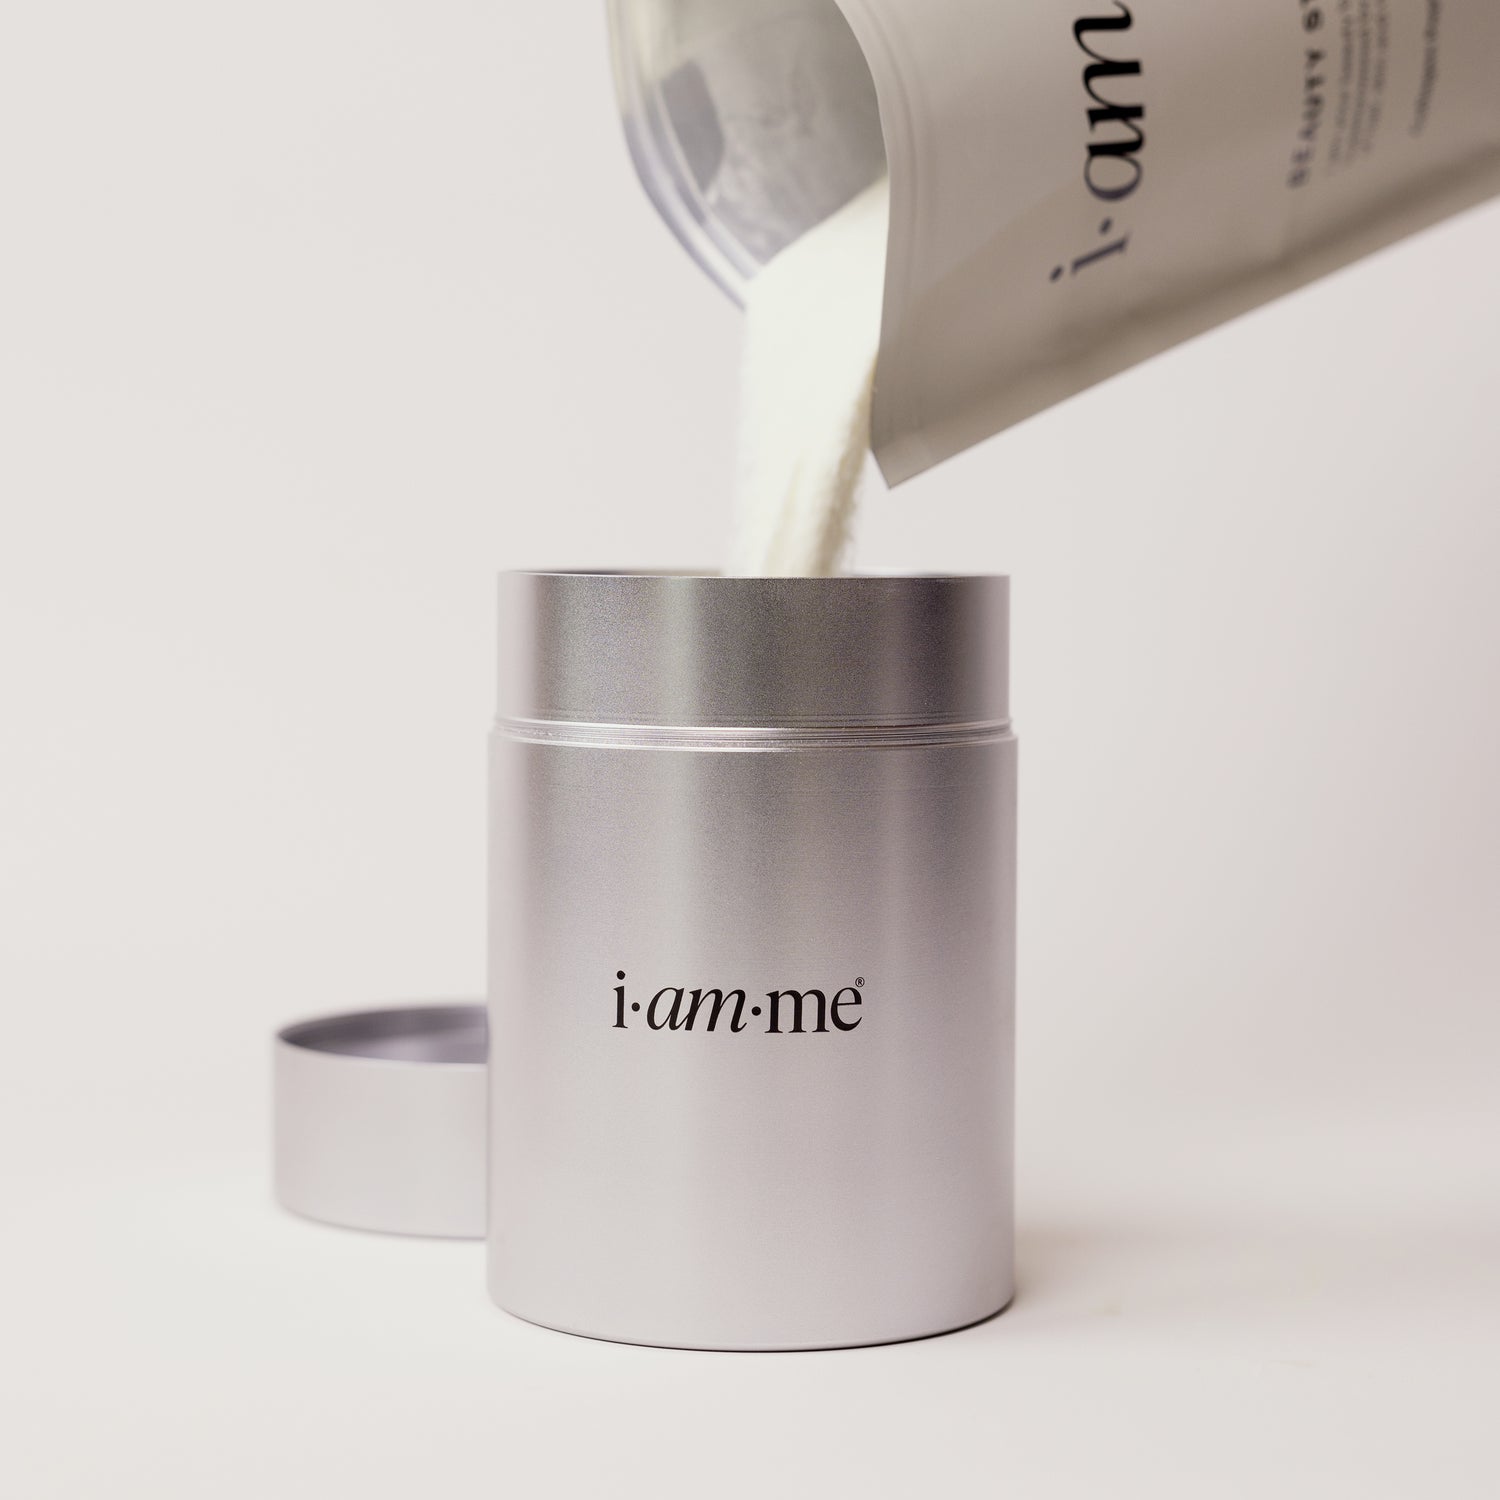 Infinitely reusable and recyclable aluminium canisters